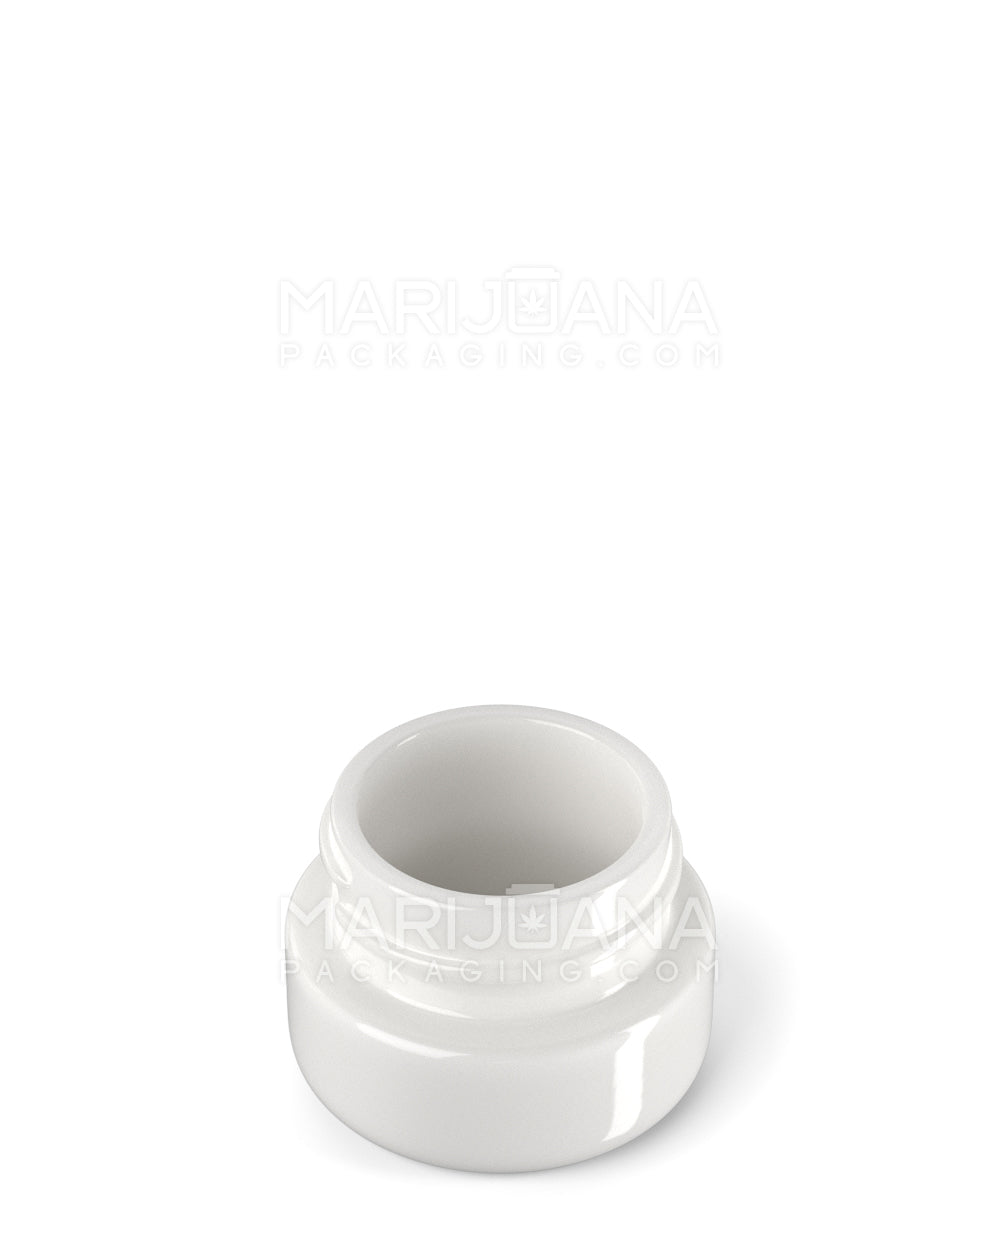 Glossy White Glass Concentrate Containers | 29mm - 5mL - 300 Count - 2